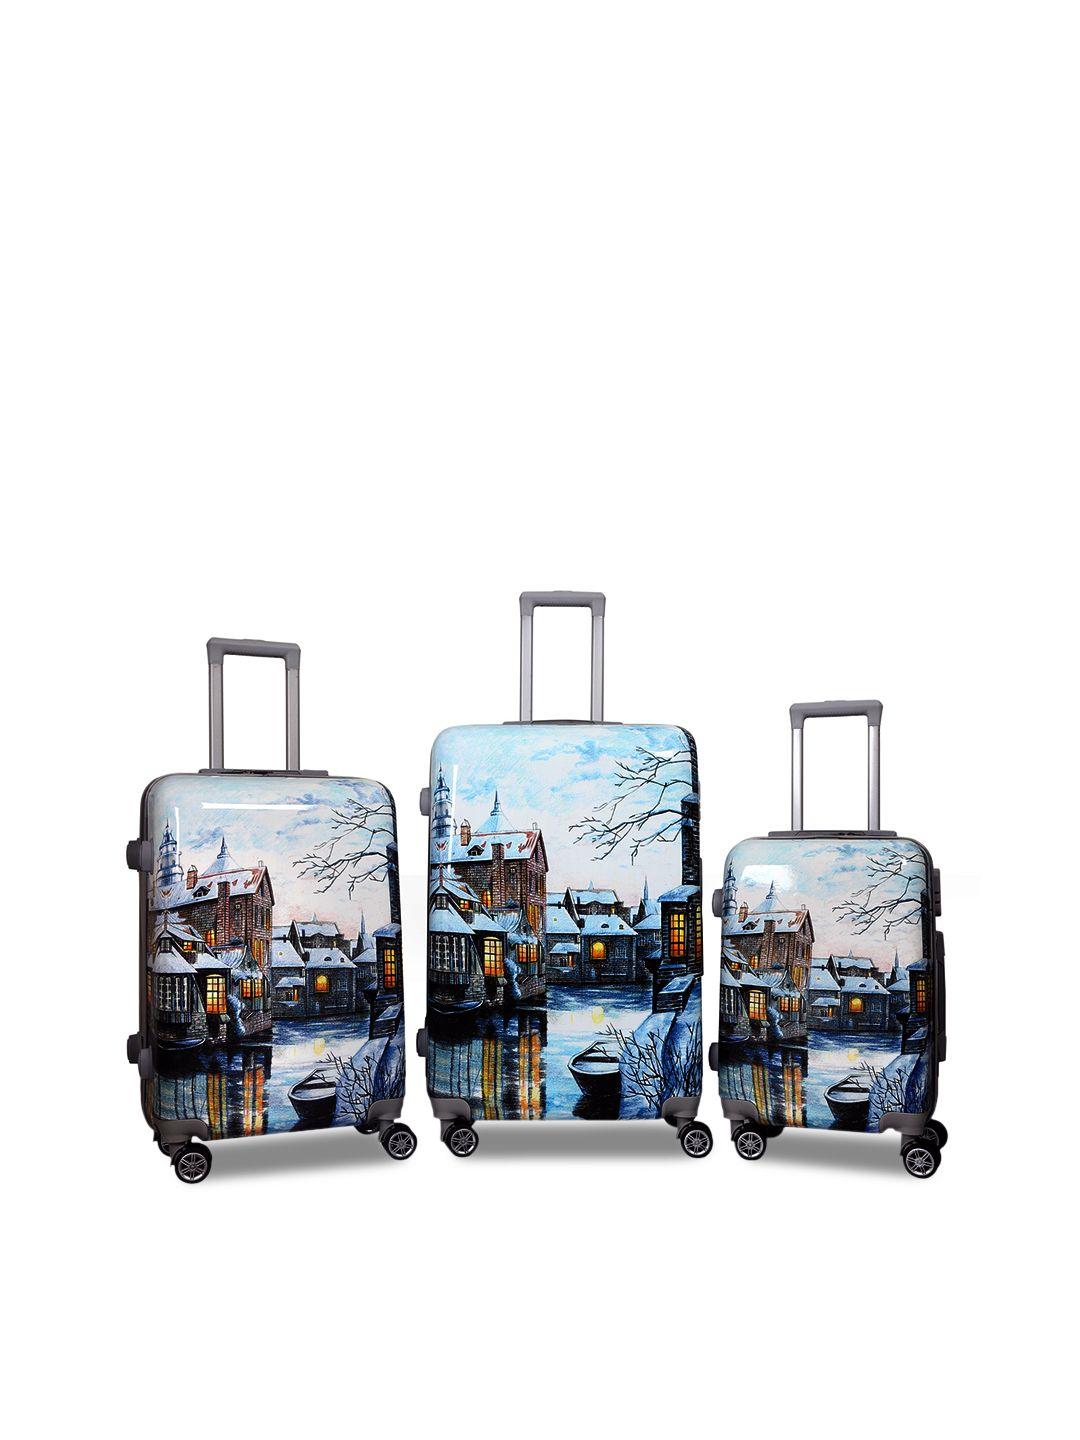 polo class set of 3 blue & white printed trolley bags